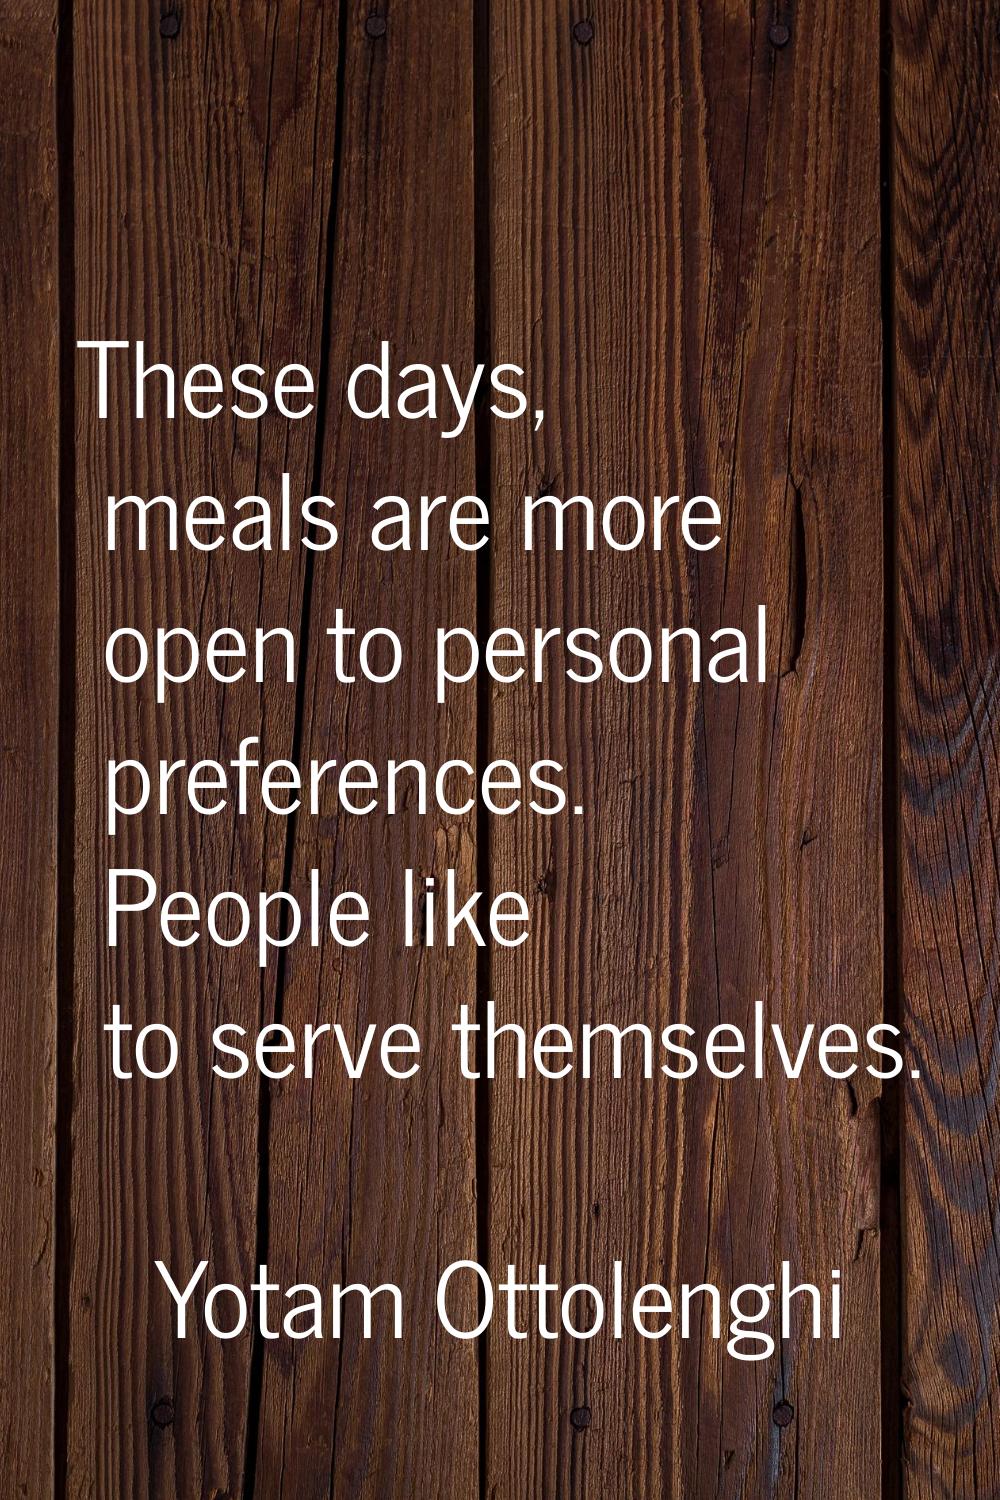 These days, meals are more open to personal preferences. People like to serve themselves.